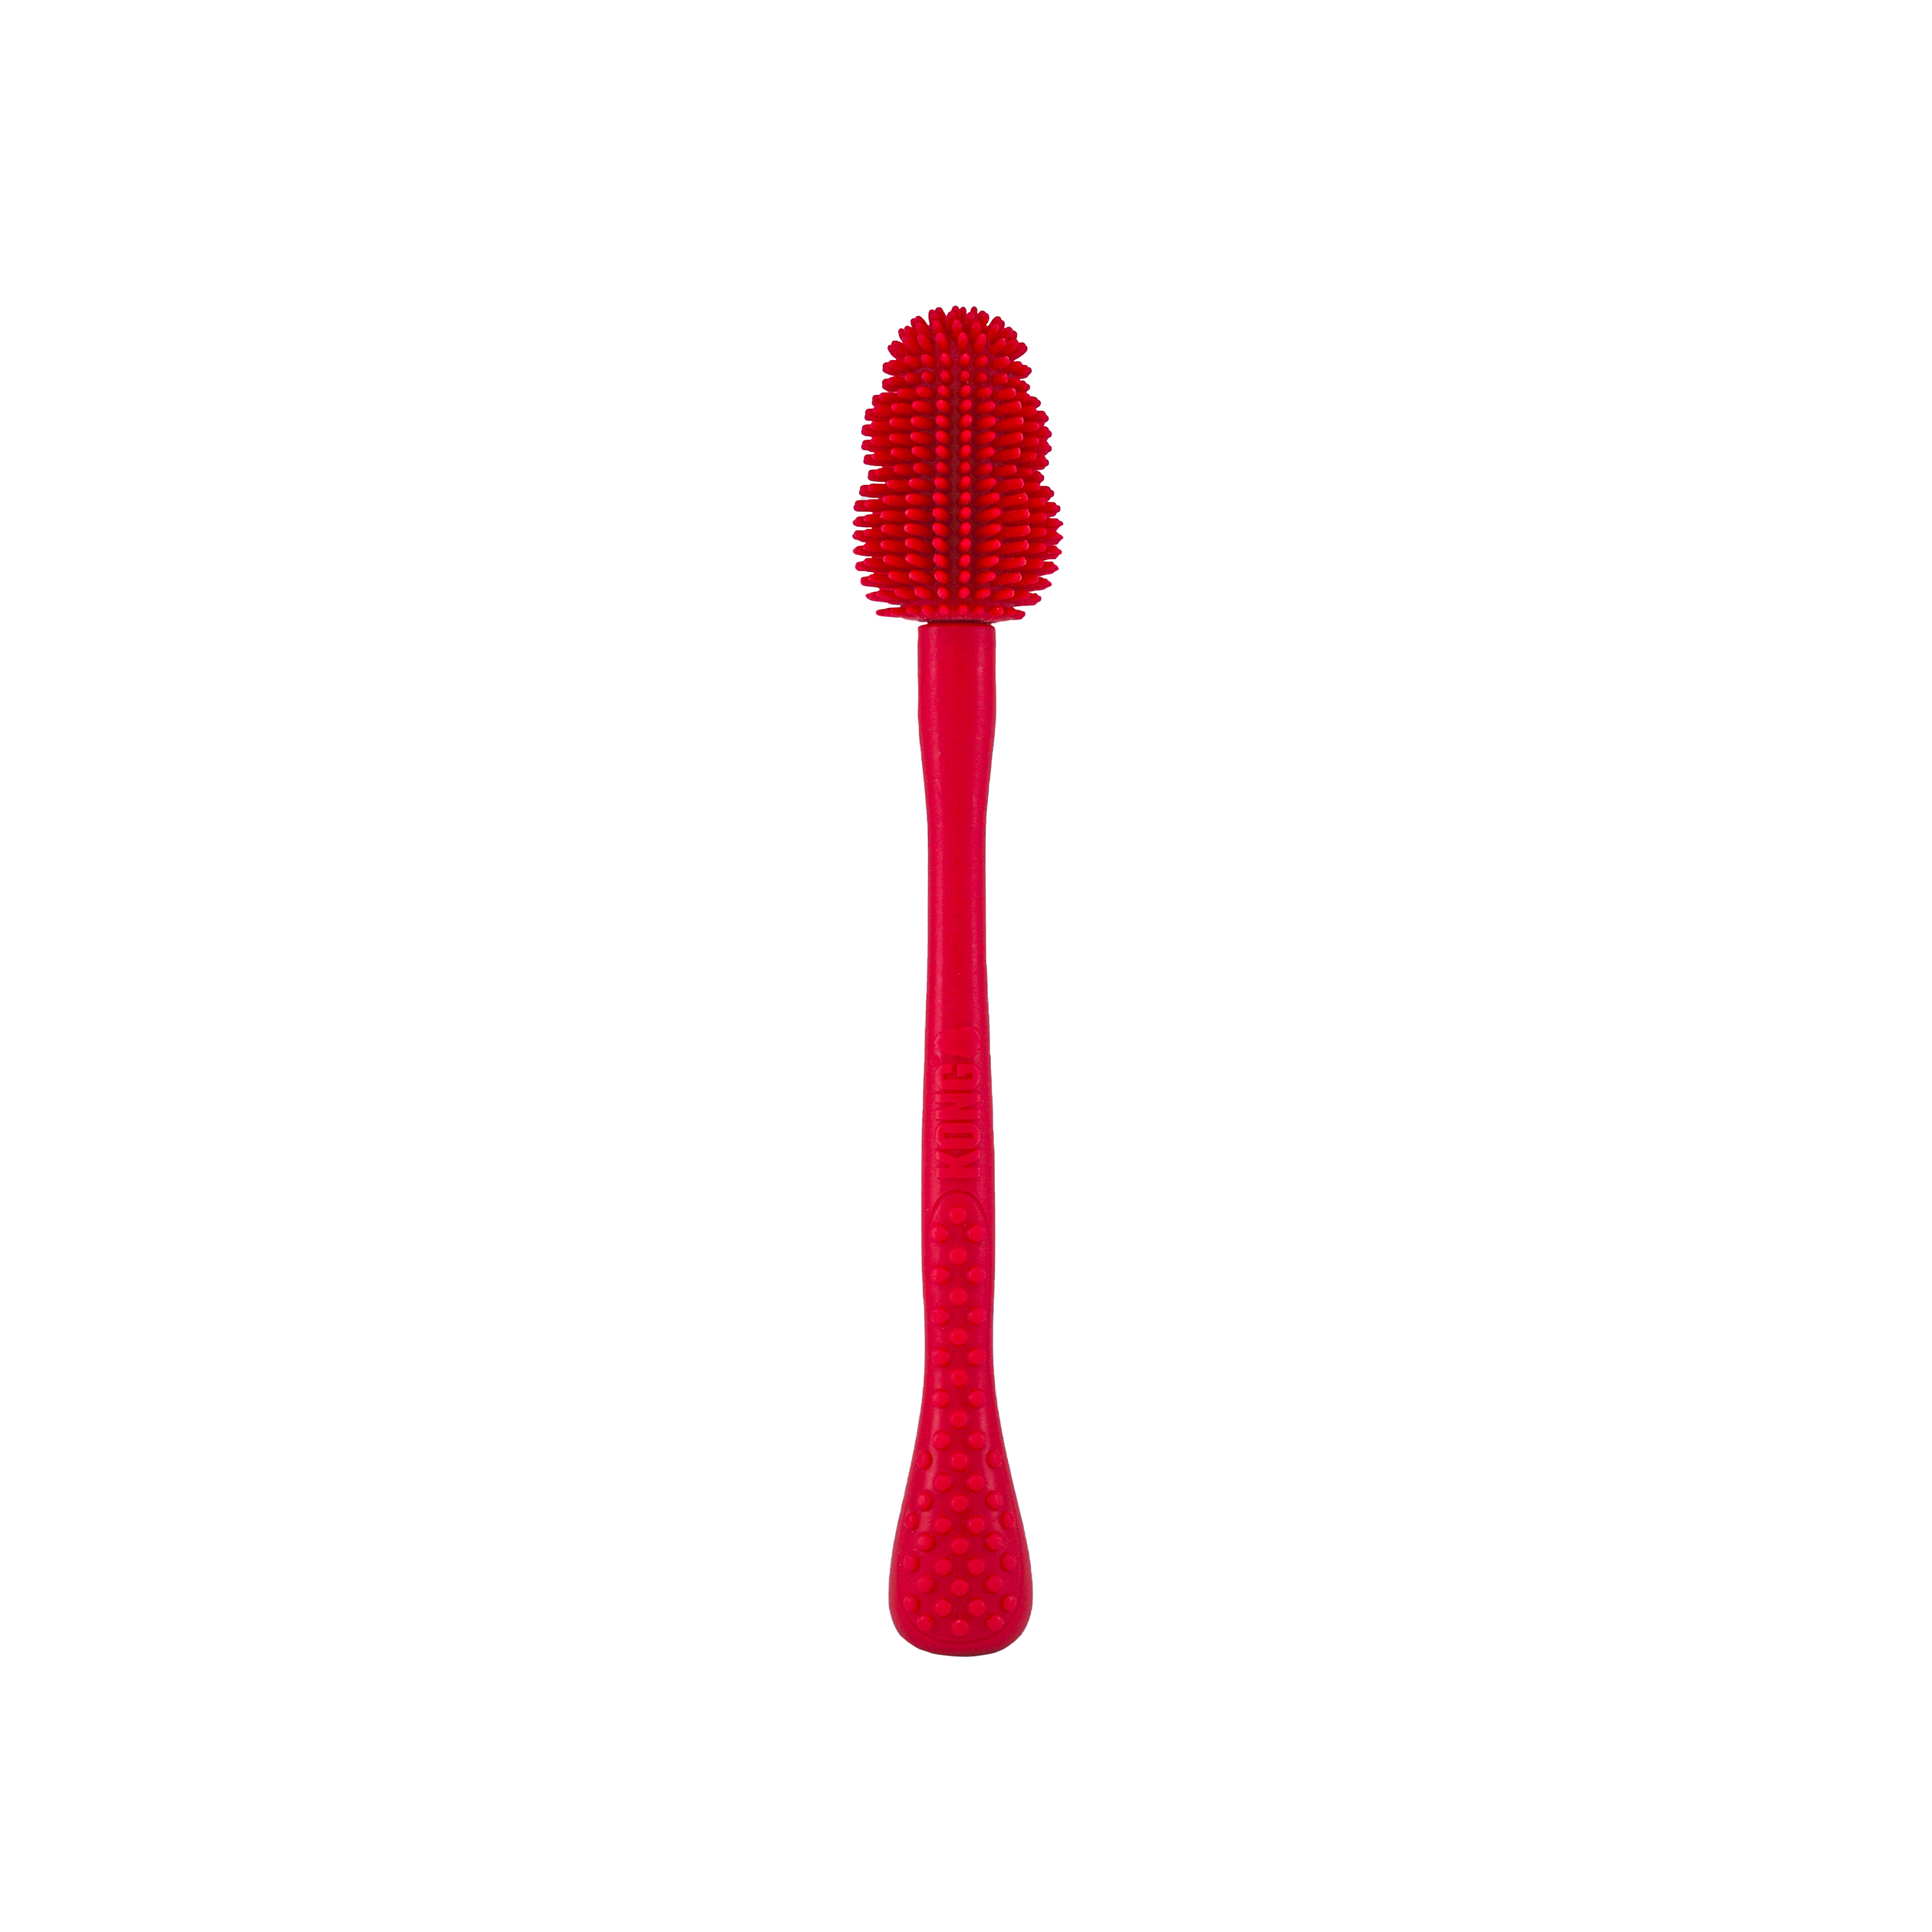 KONG Cleaning Brush offpack product image